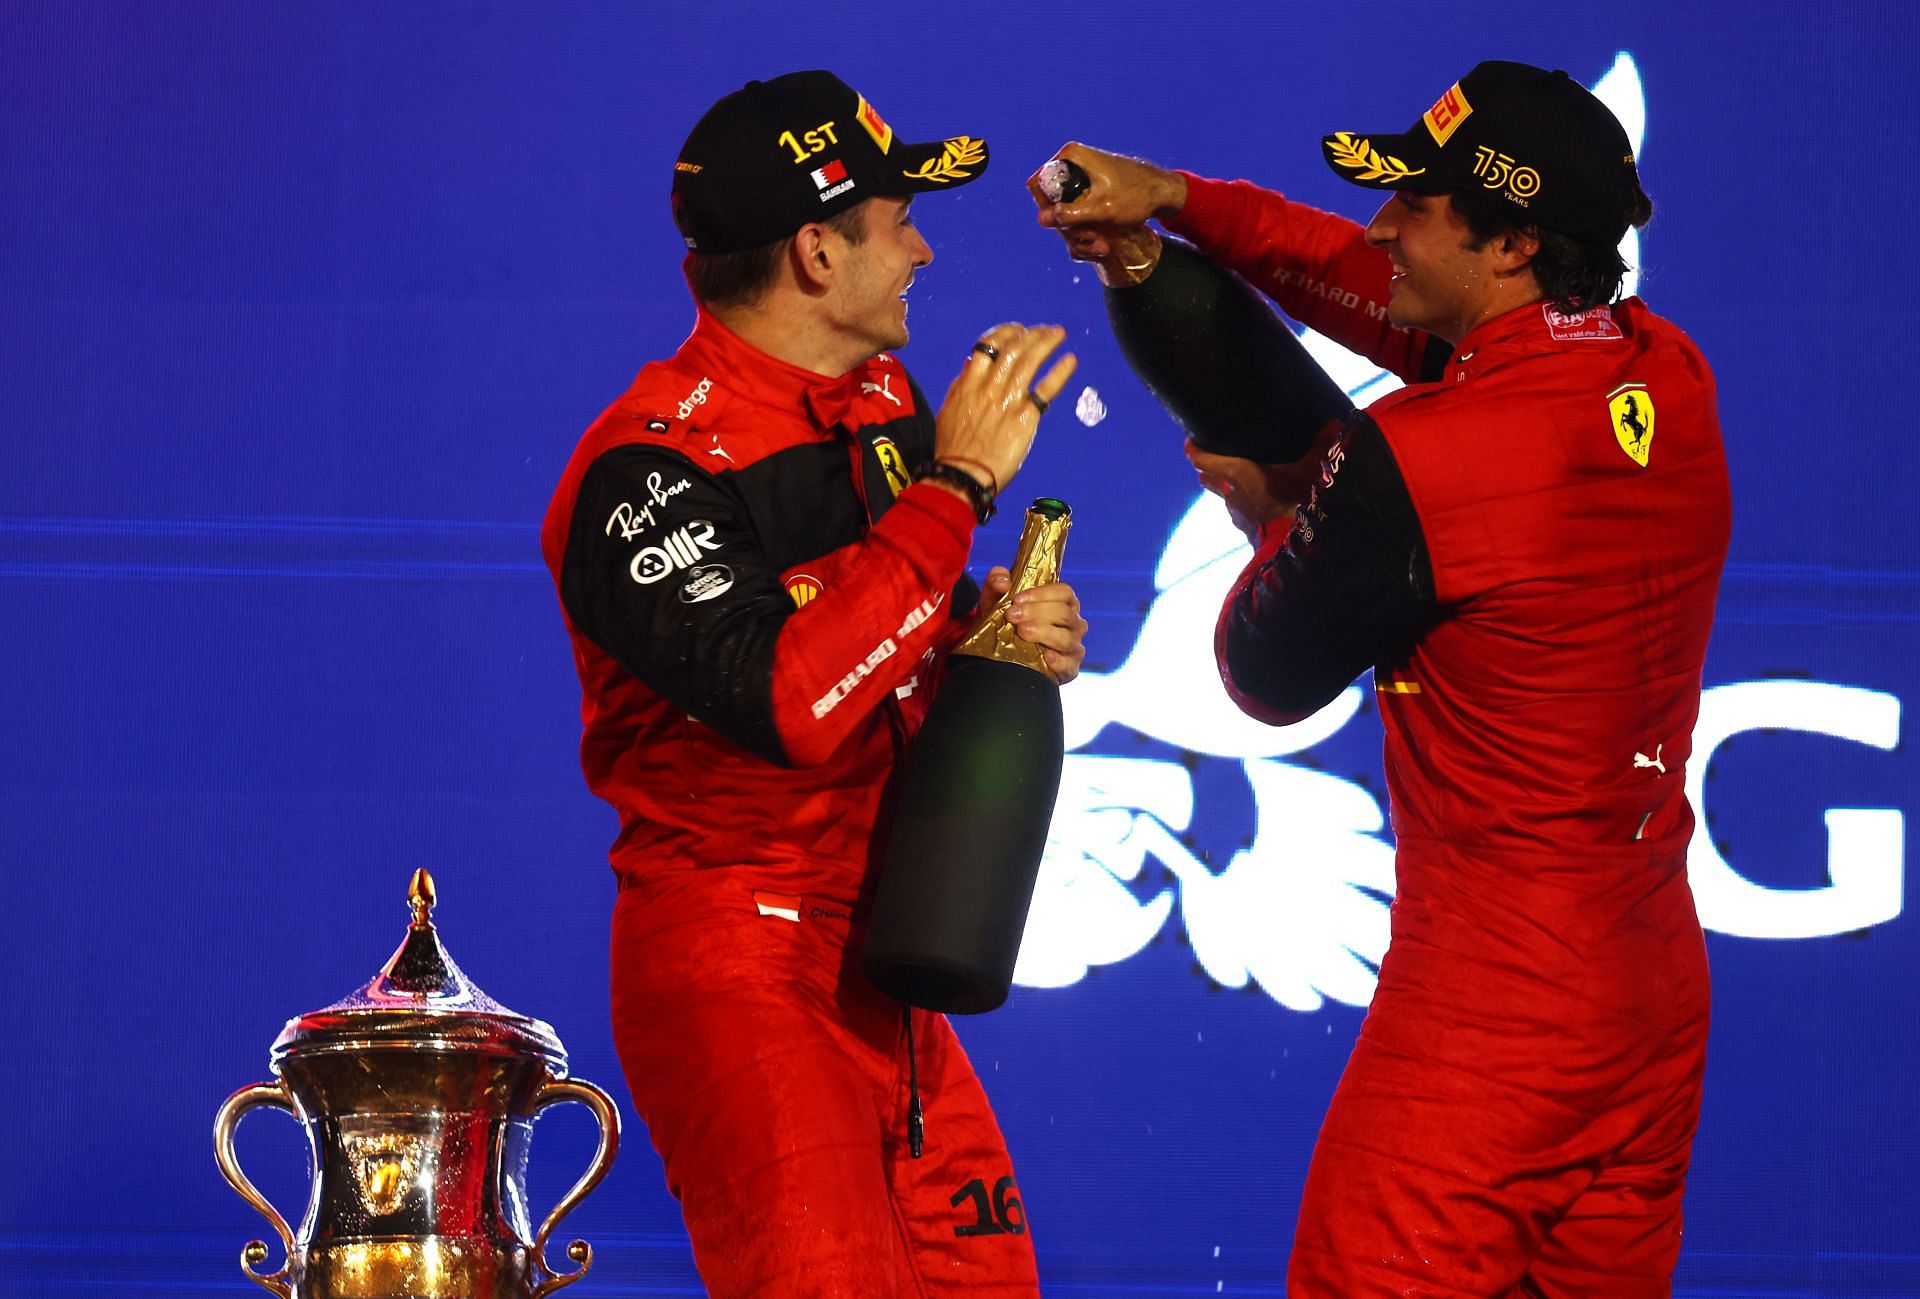 Charles Leclerc (left) and Carlos Sainz (right) at the F1 Grand Prix of Bahrain